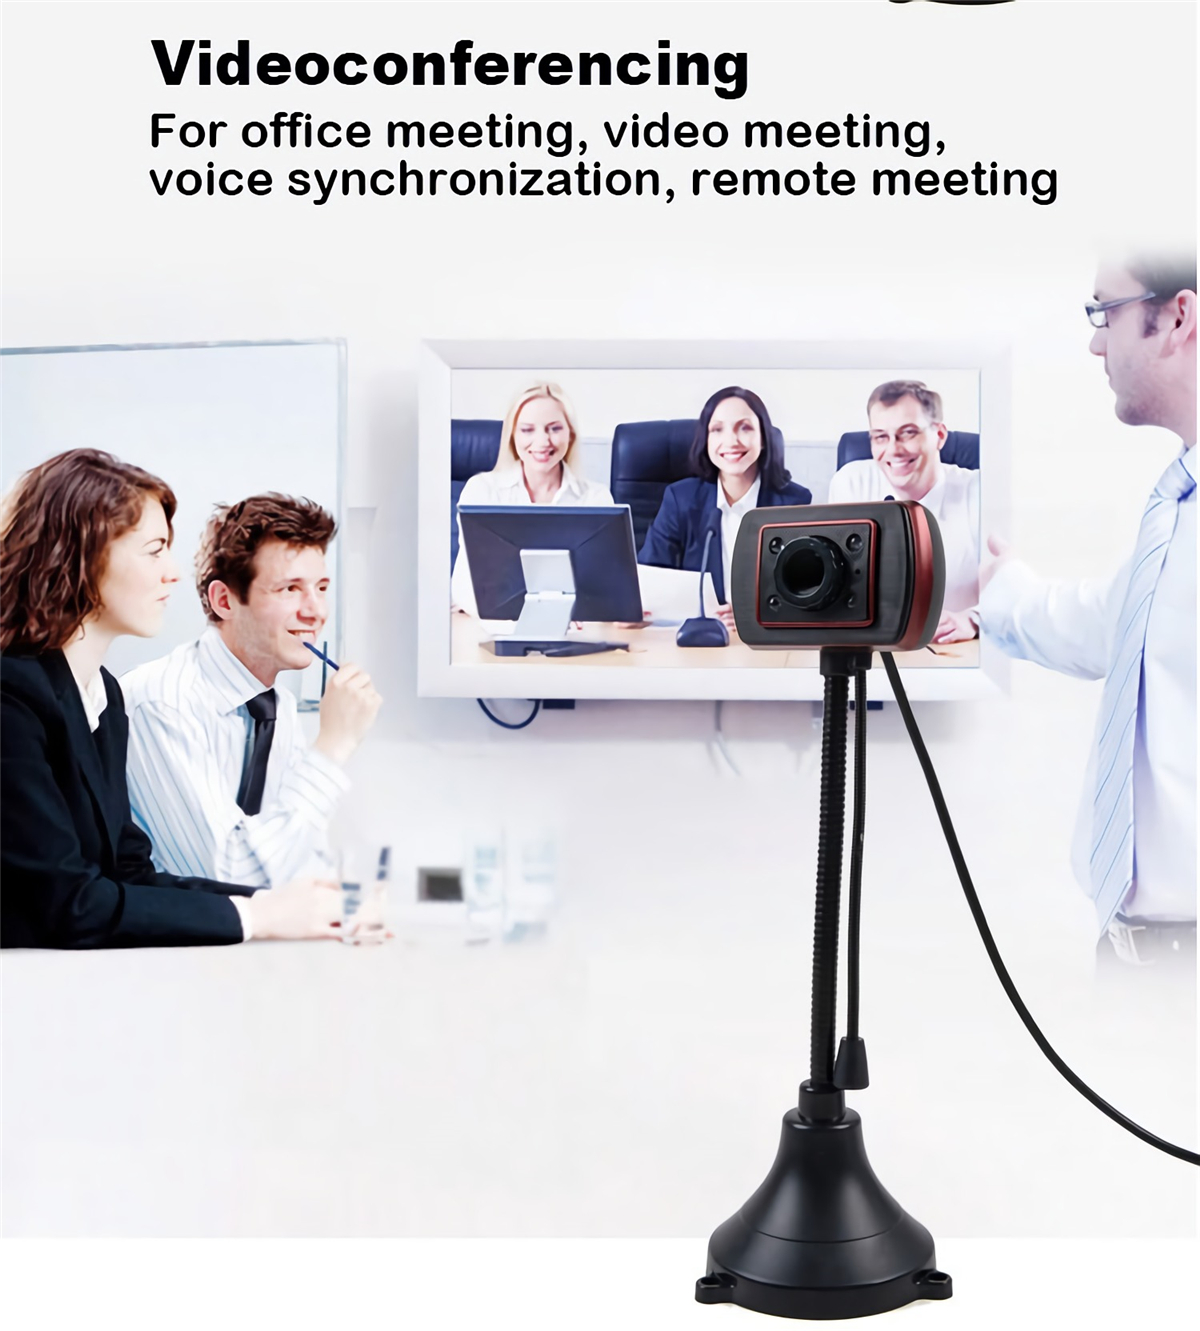 S620-480P-HD-Webcam-CMOS-USB-20-Wired-Computer-Web-Camera-Built-in-Microphone-Camera-for-Desktop-Com-1891978-4